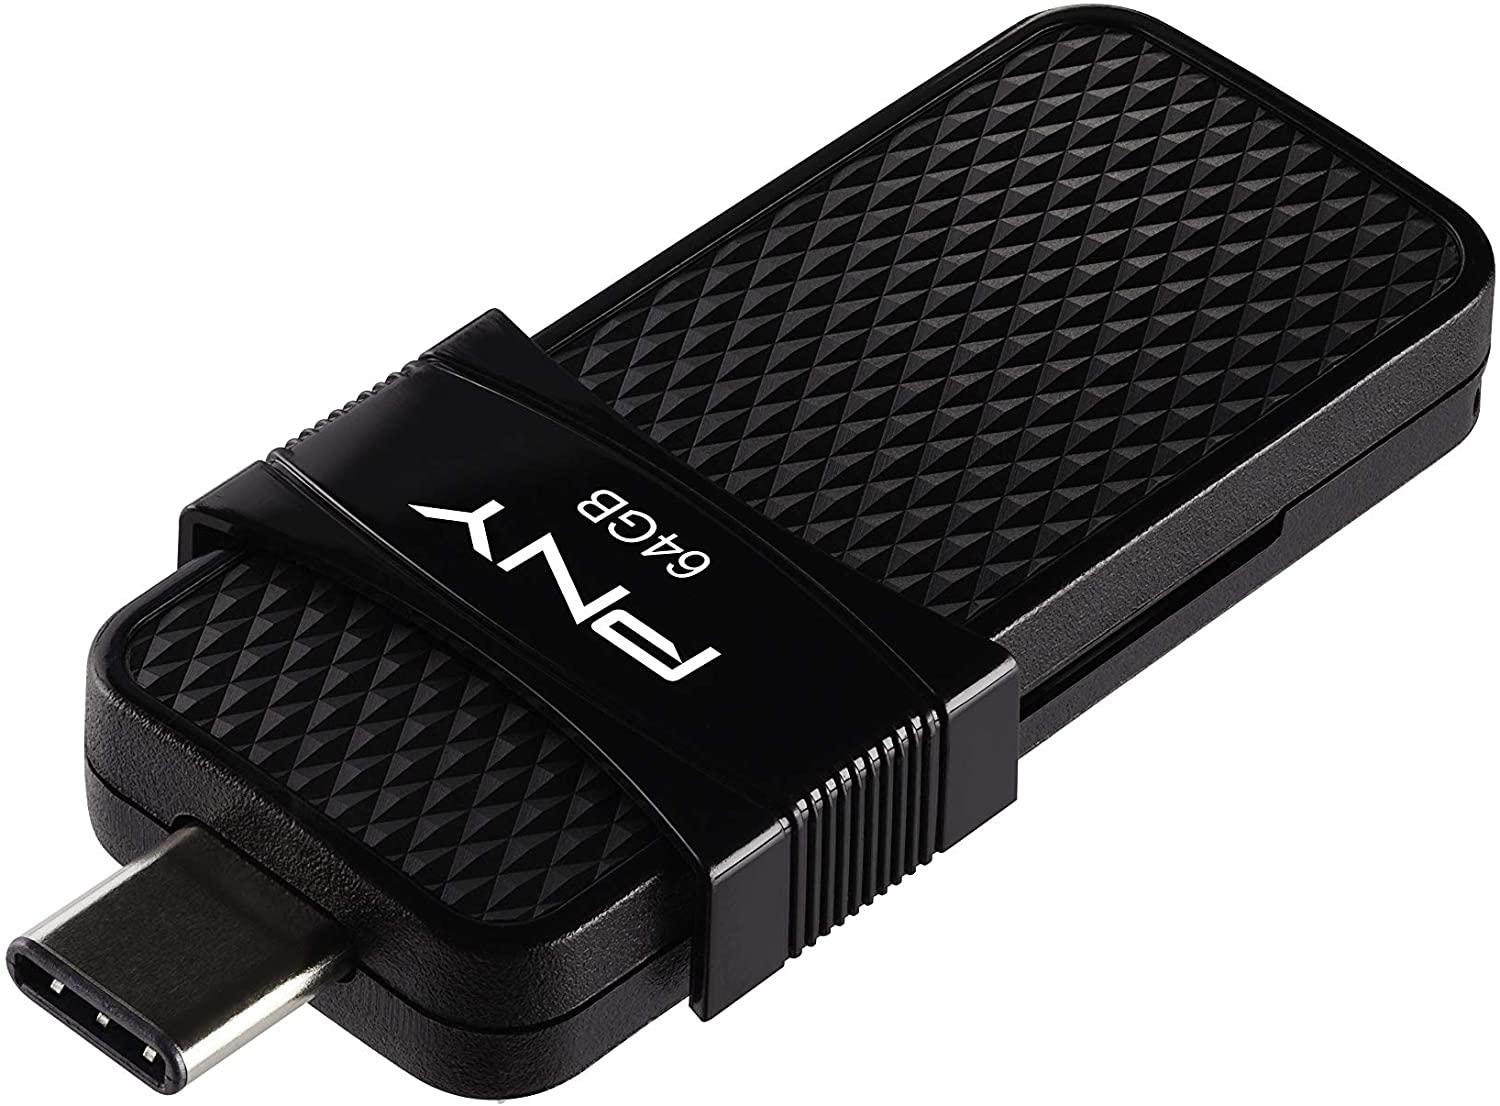 64GB PNY Duo Link USB 3.1 Type-C OTG Flash Drive for $12.99